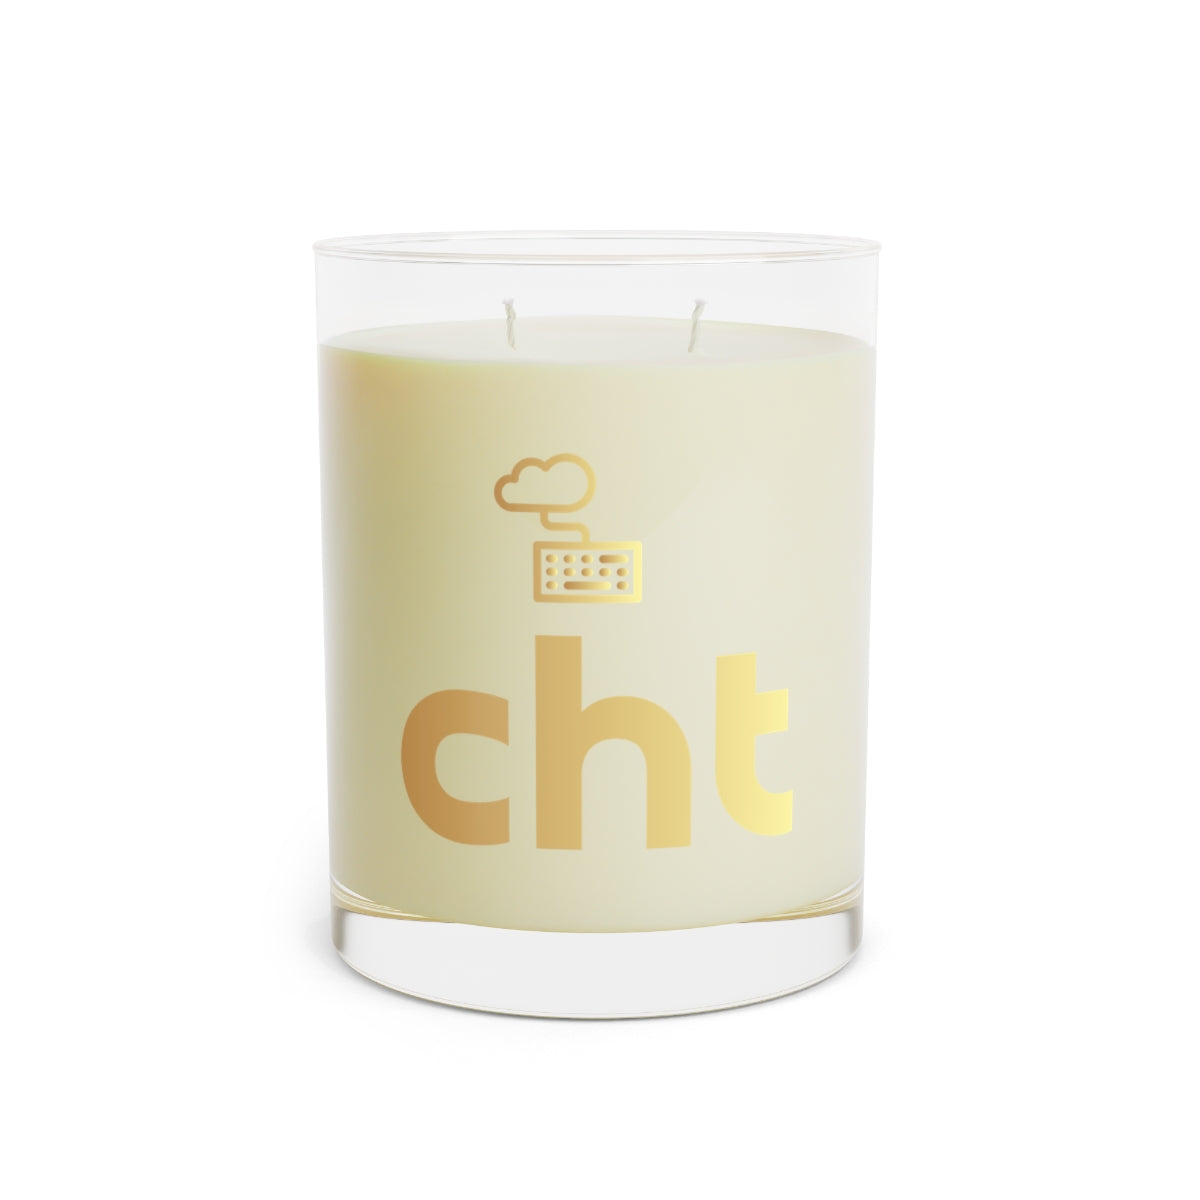 CHT Scented Candle - Full Glass, 11oz